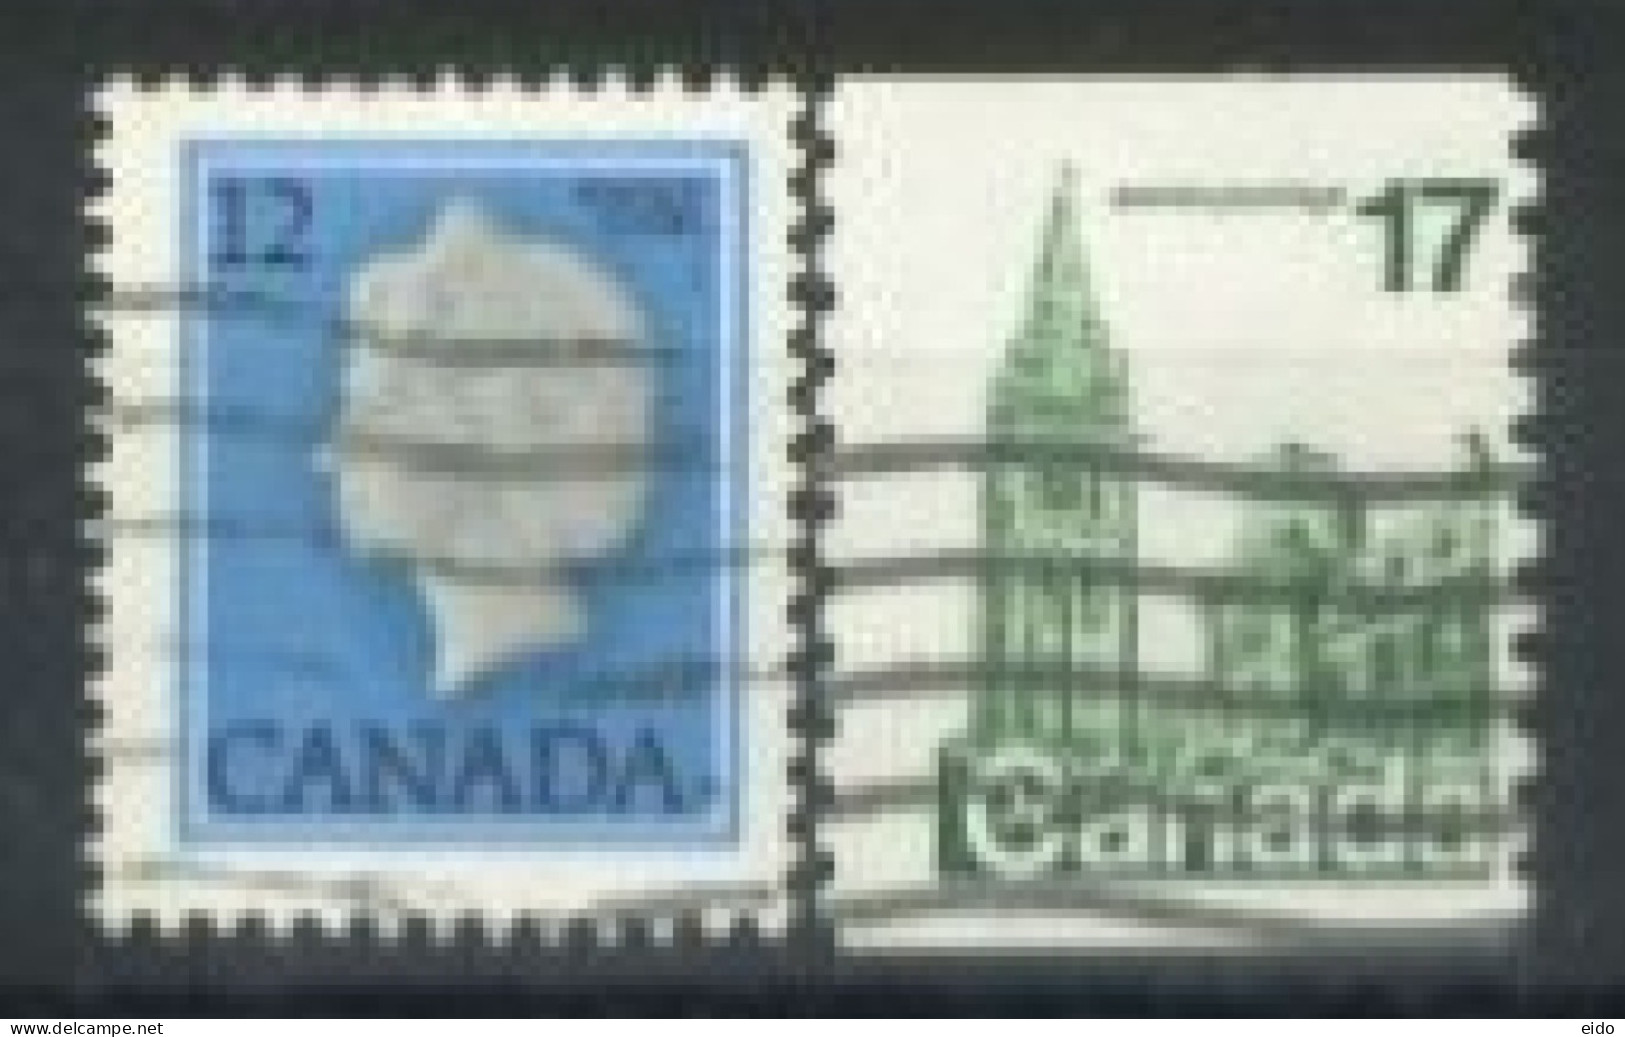 CANADA - 1977, QUEEN ELIZABETH II & HOUSE OF PARLIAMENT STAMPS SET OF 2, USED. - Oblitérés